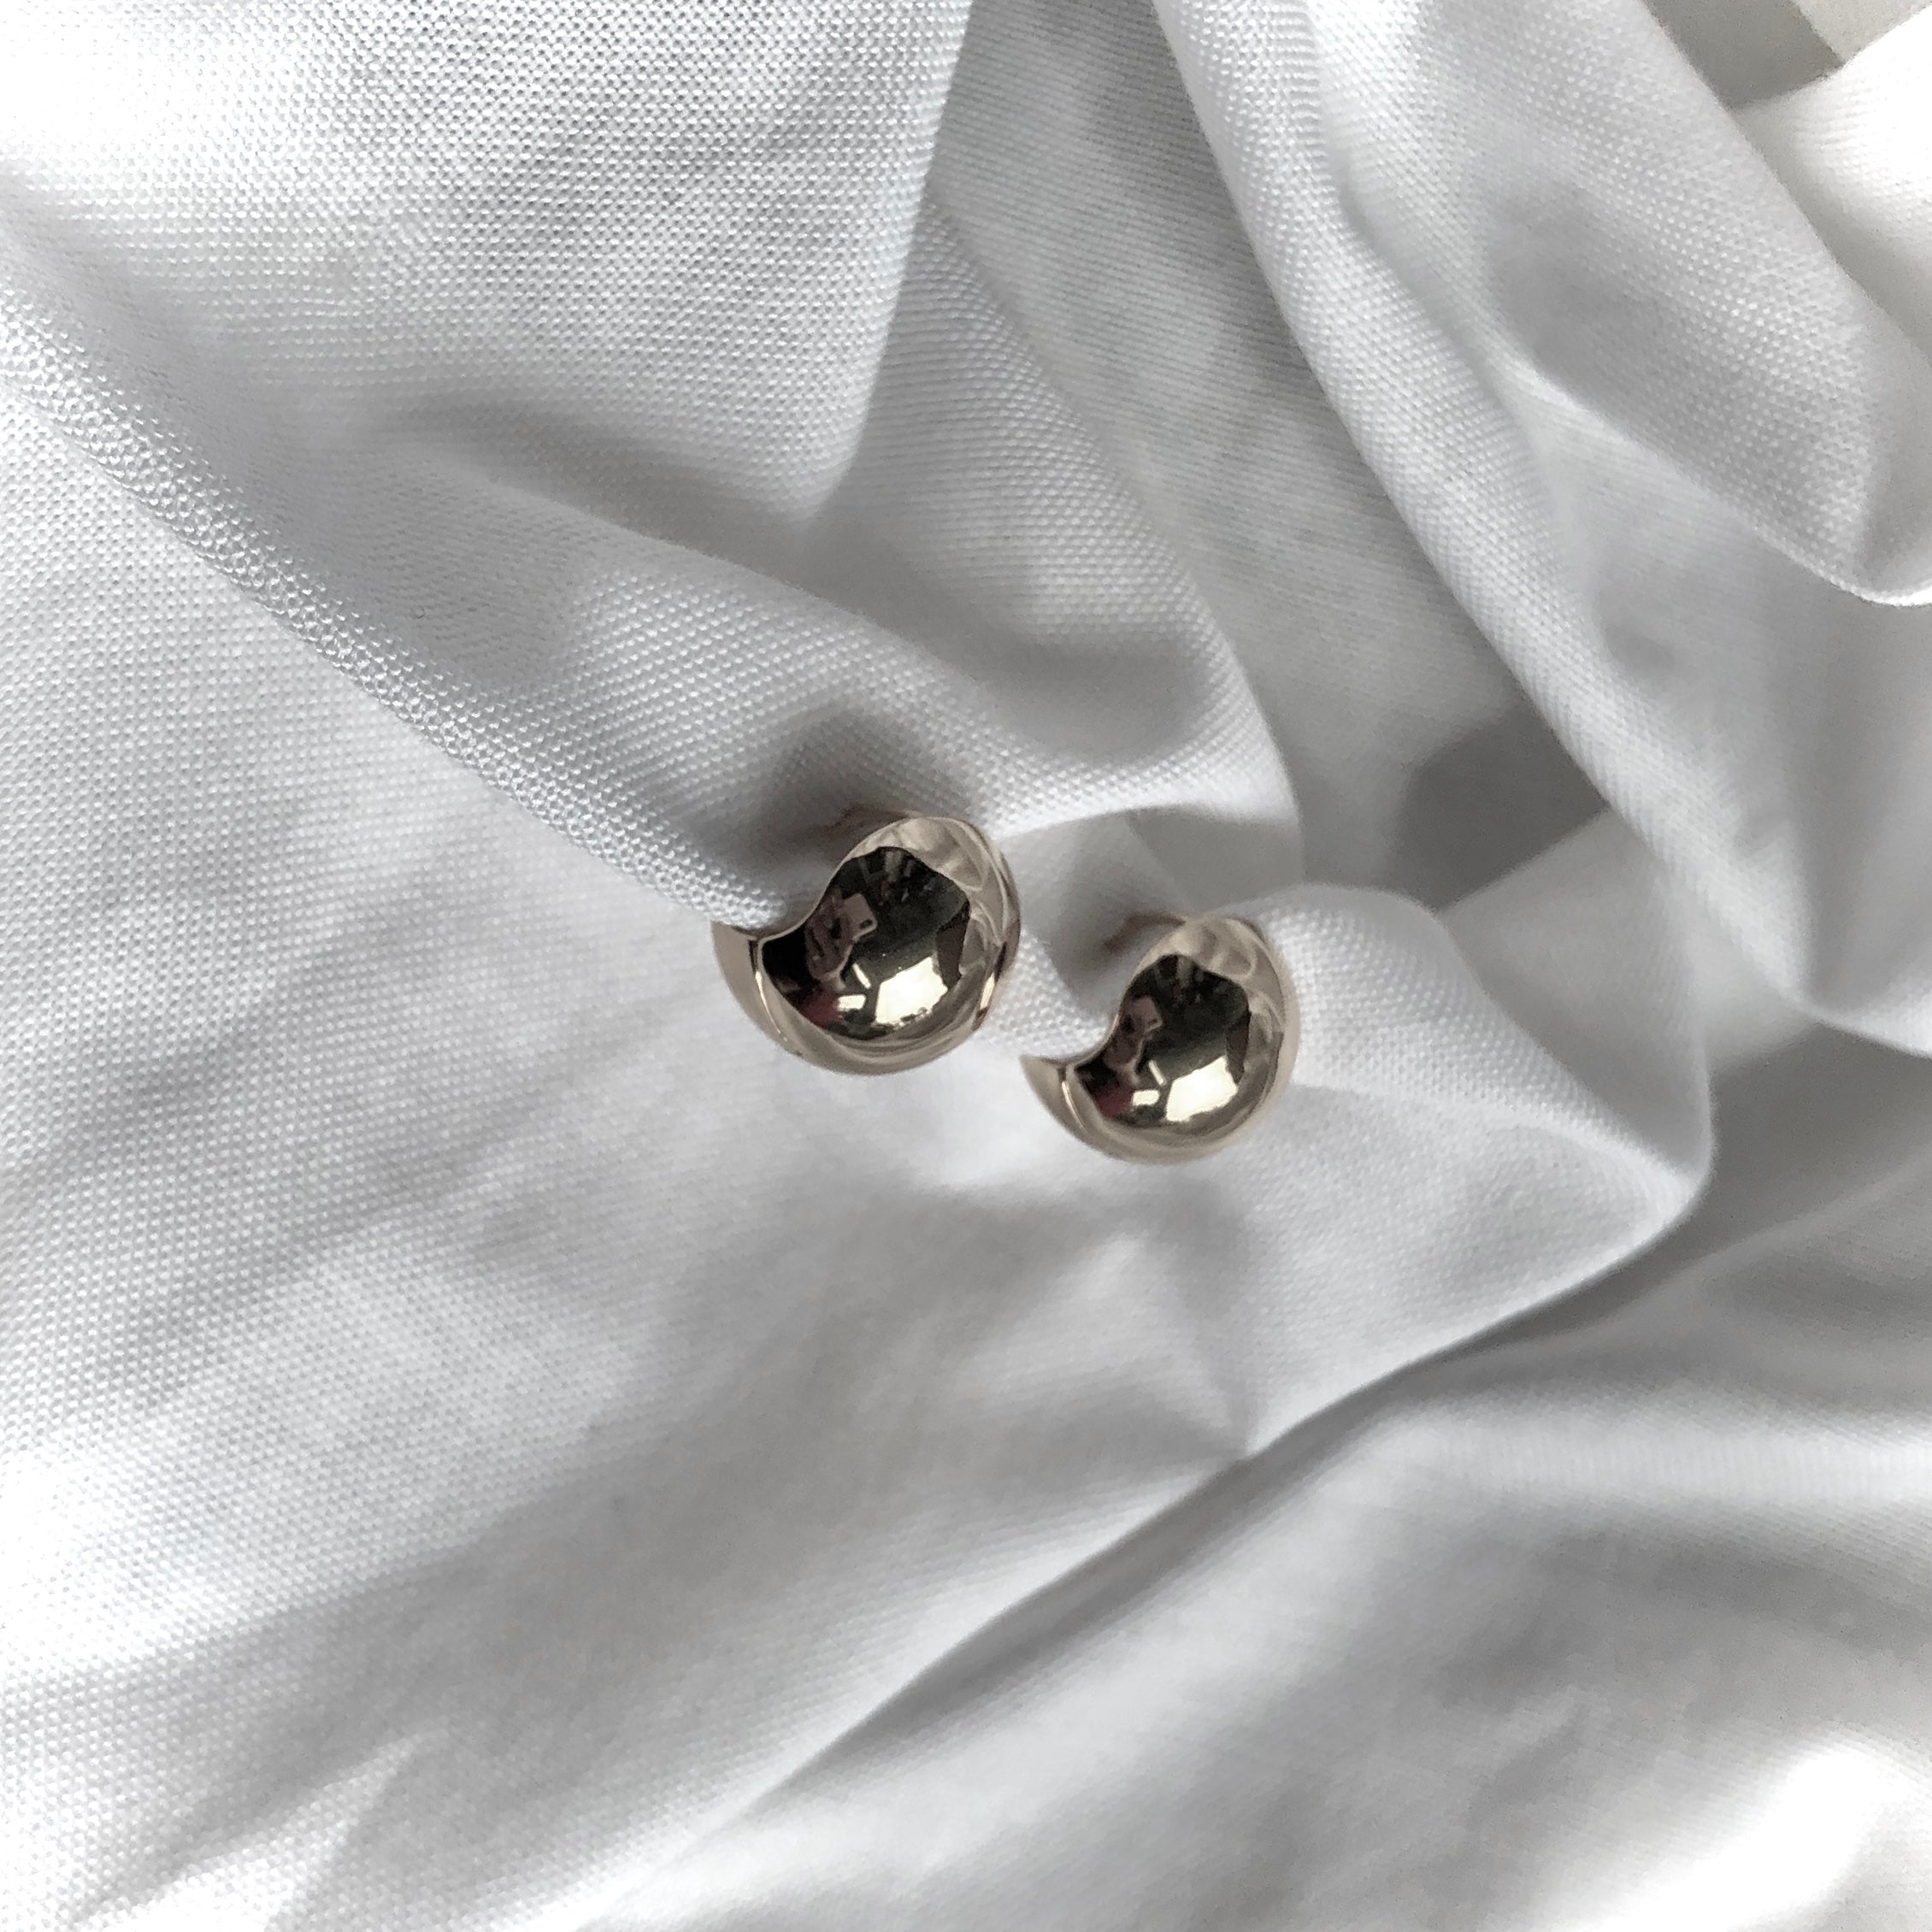 Ball Earrings in 925 Silver by Veronique